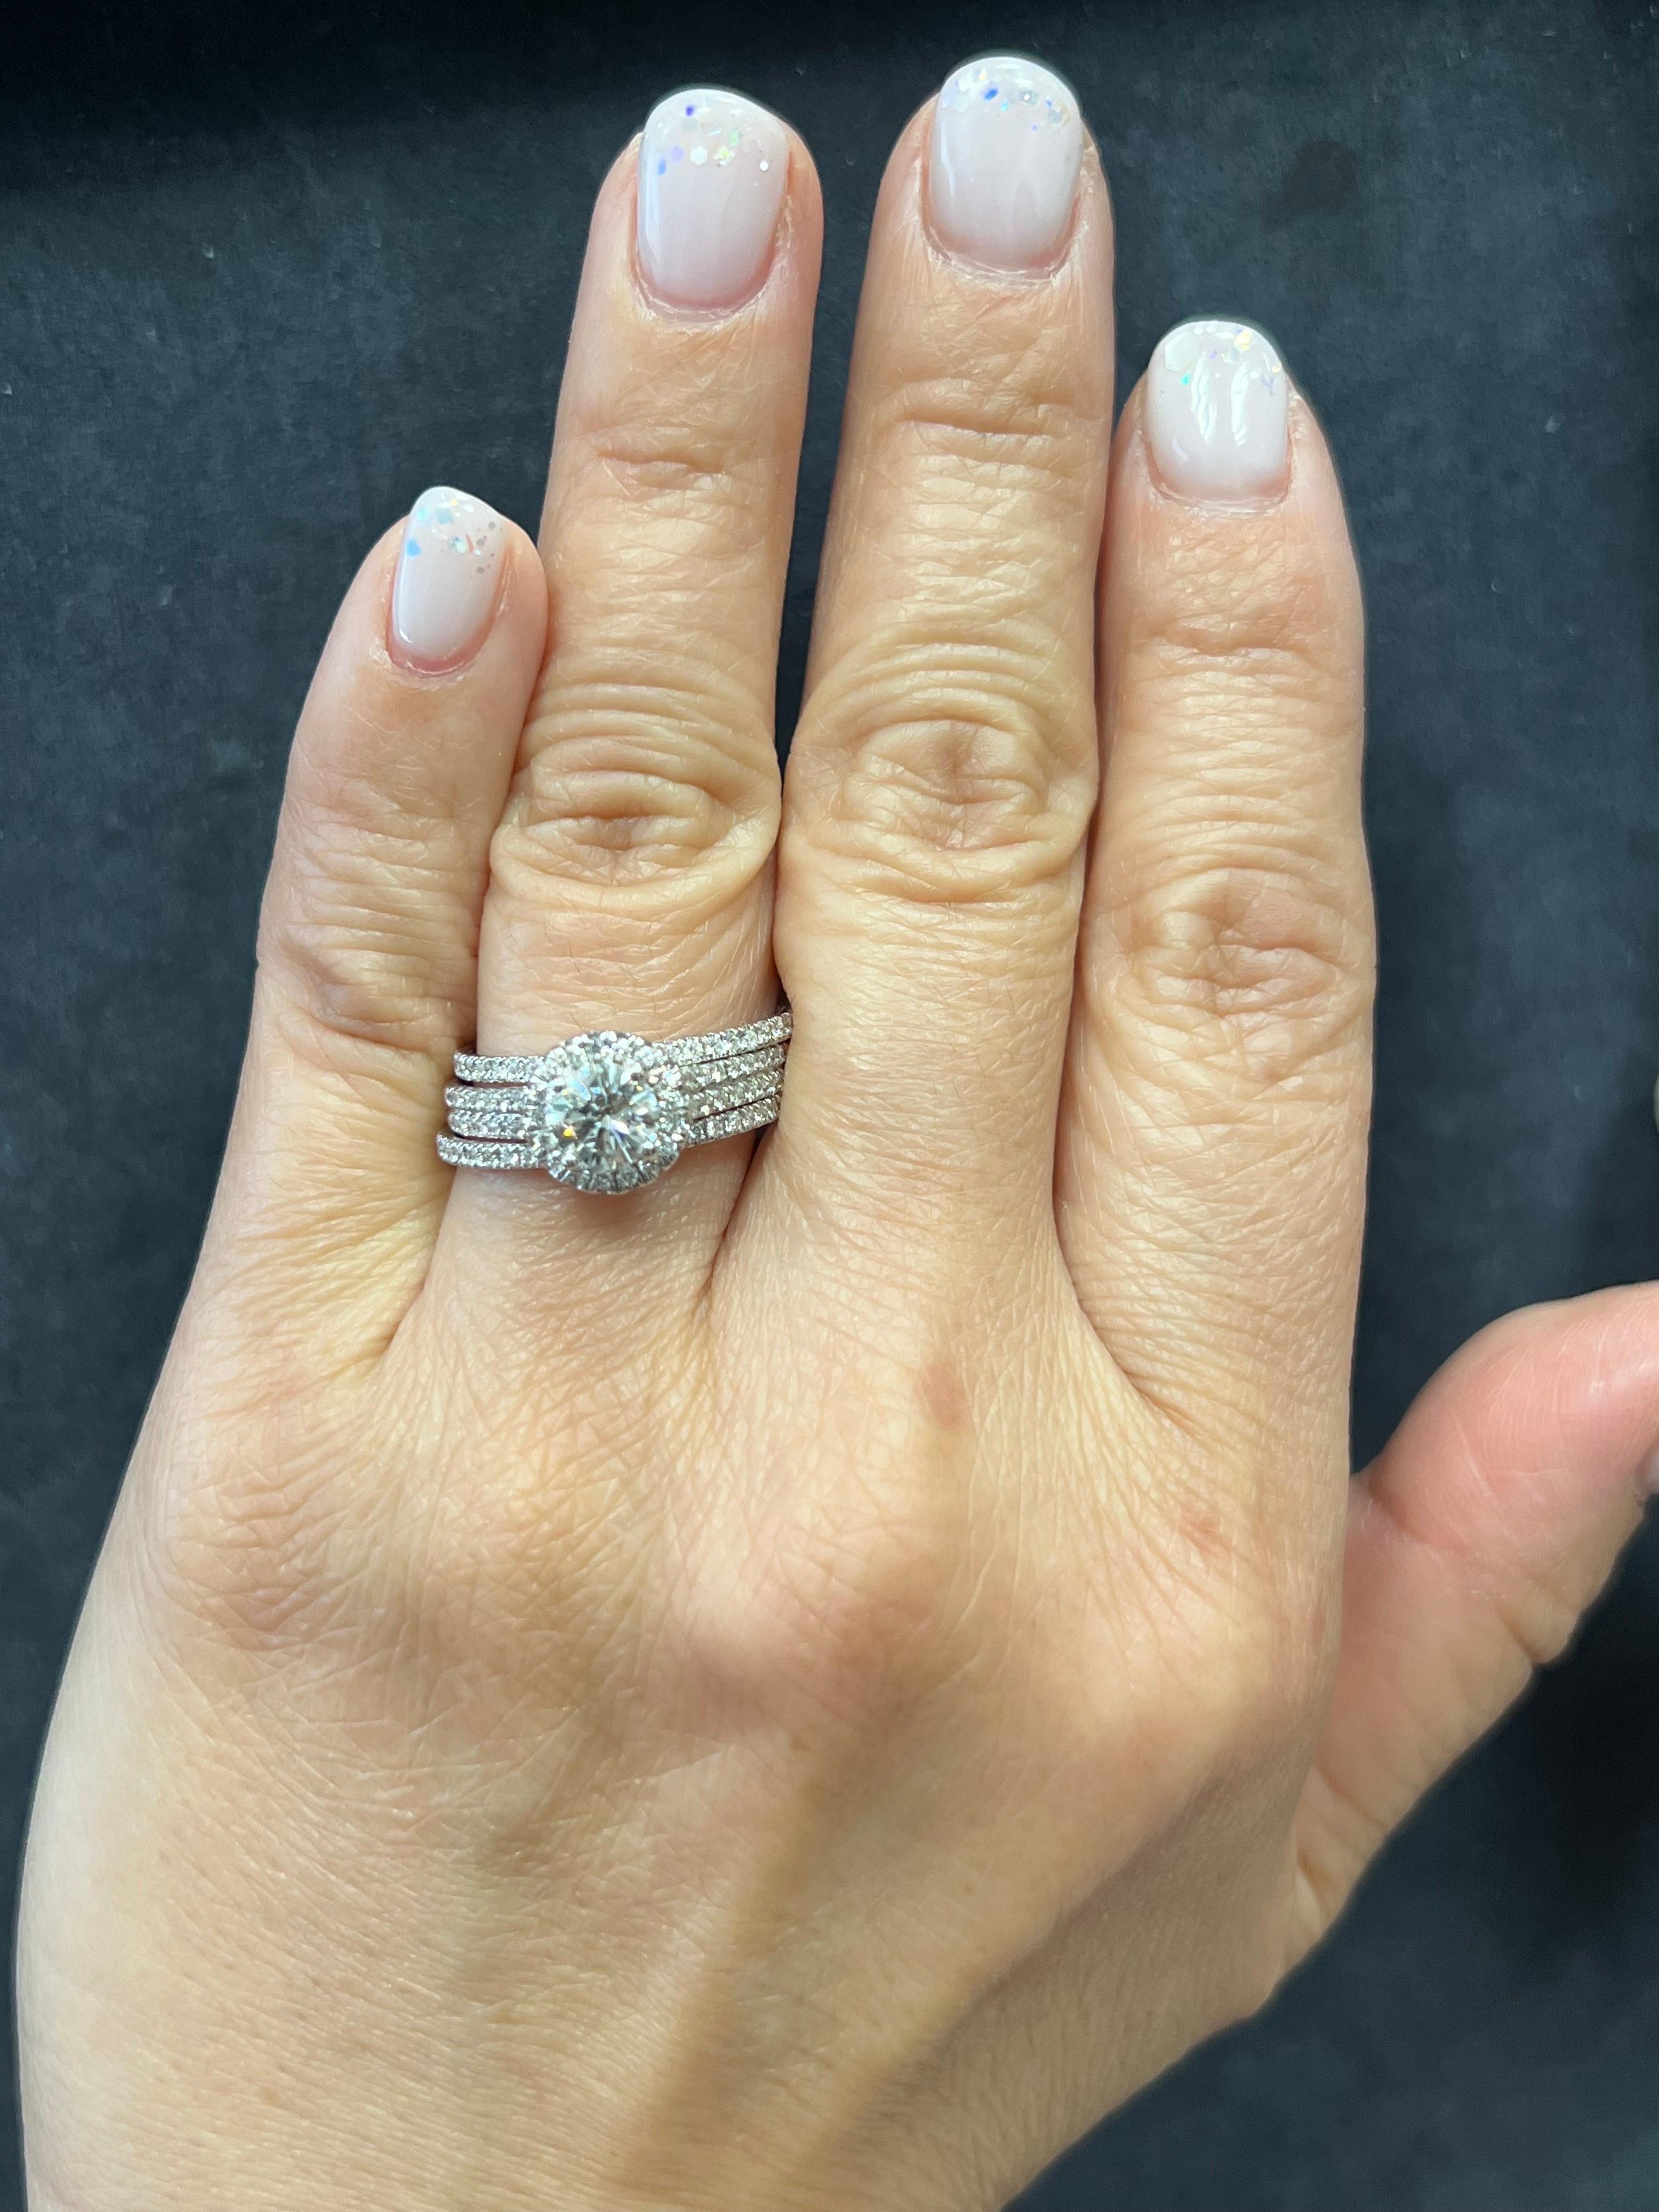 One Lady's 14k White Gold and Natural Diamond Ring Set.

The center stone is a natural round brilliant weighing 0.75 carats measuring 6.00-5.96x3.8mm. Approximately H in color and SI1 in clarity. The inclusions are pleasant and Eye-Clean.